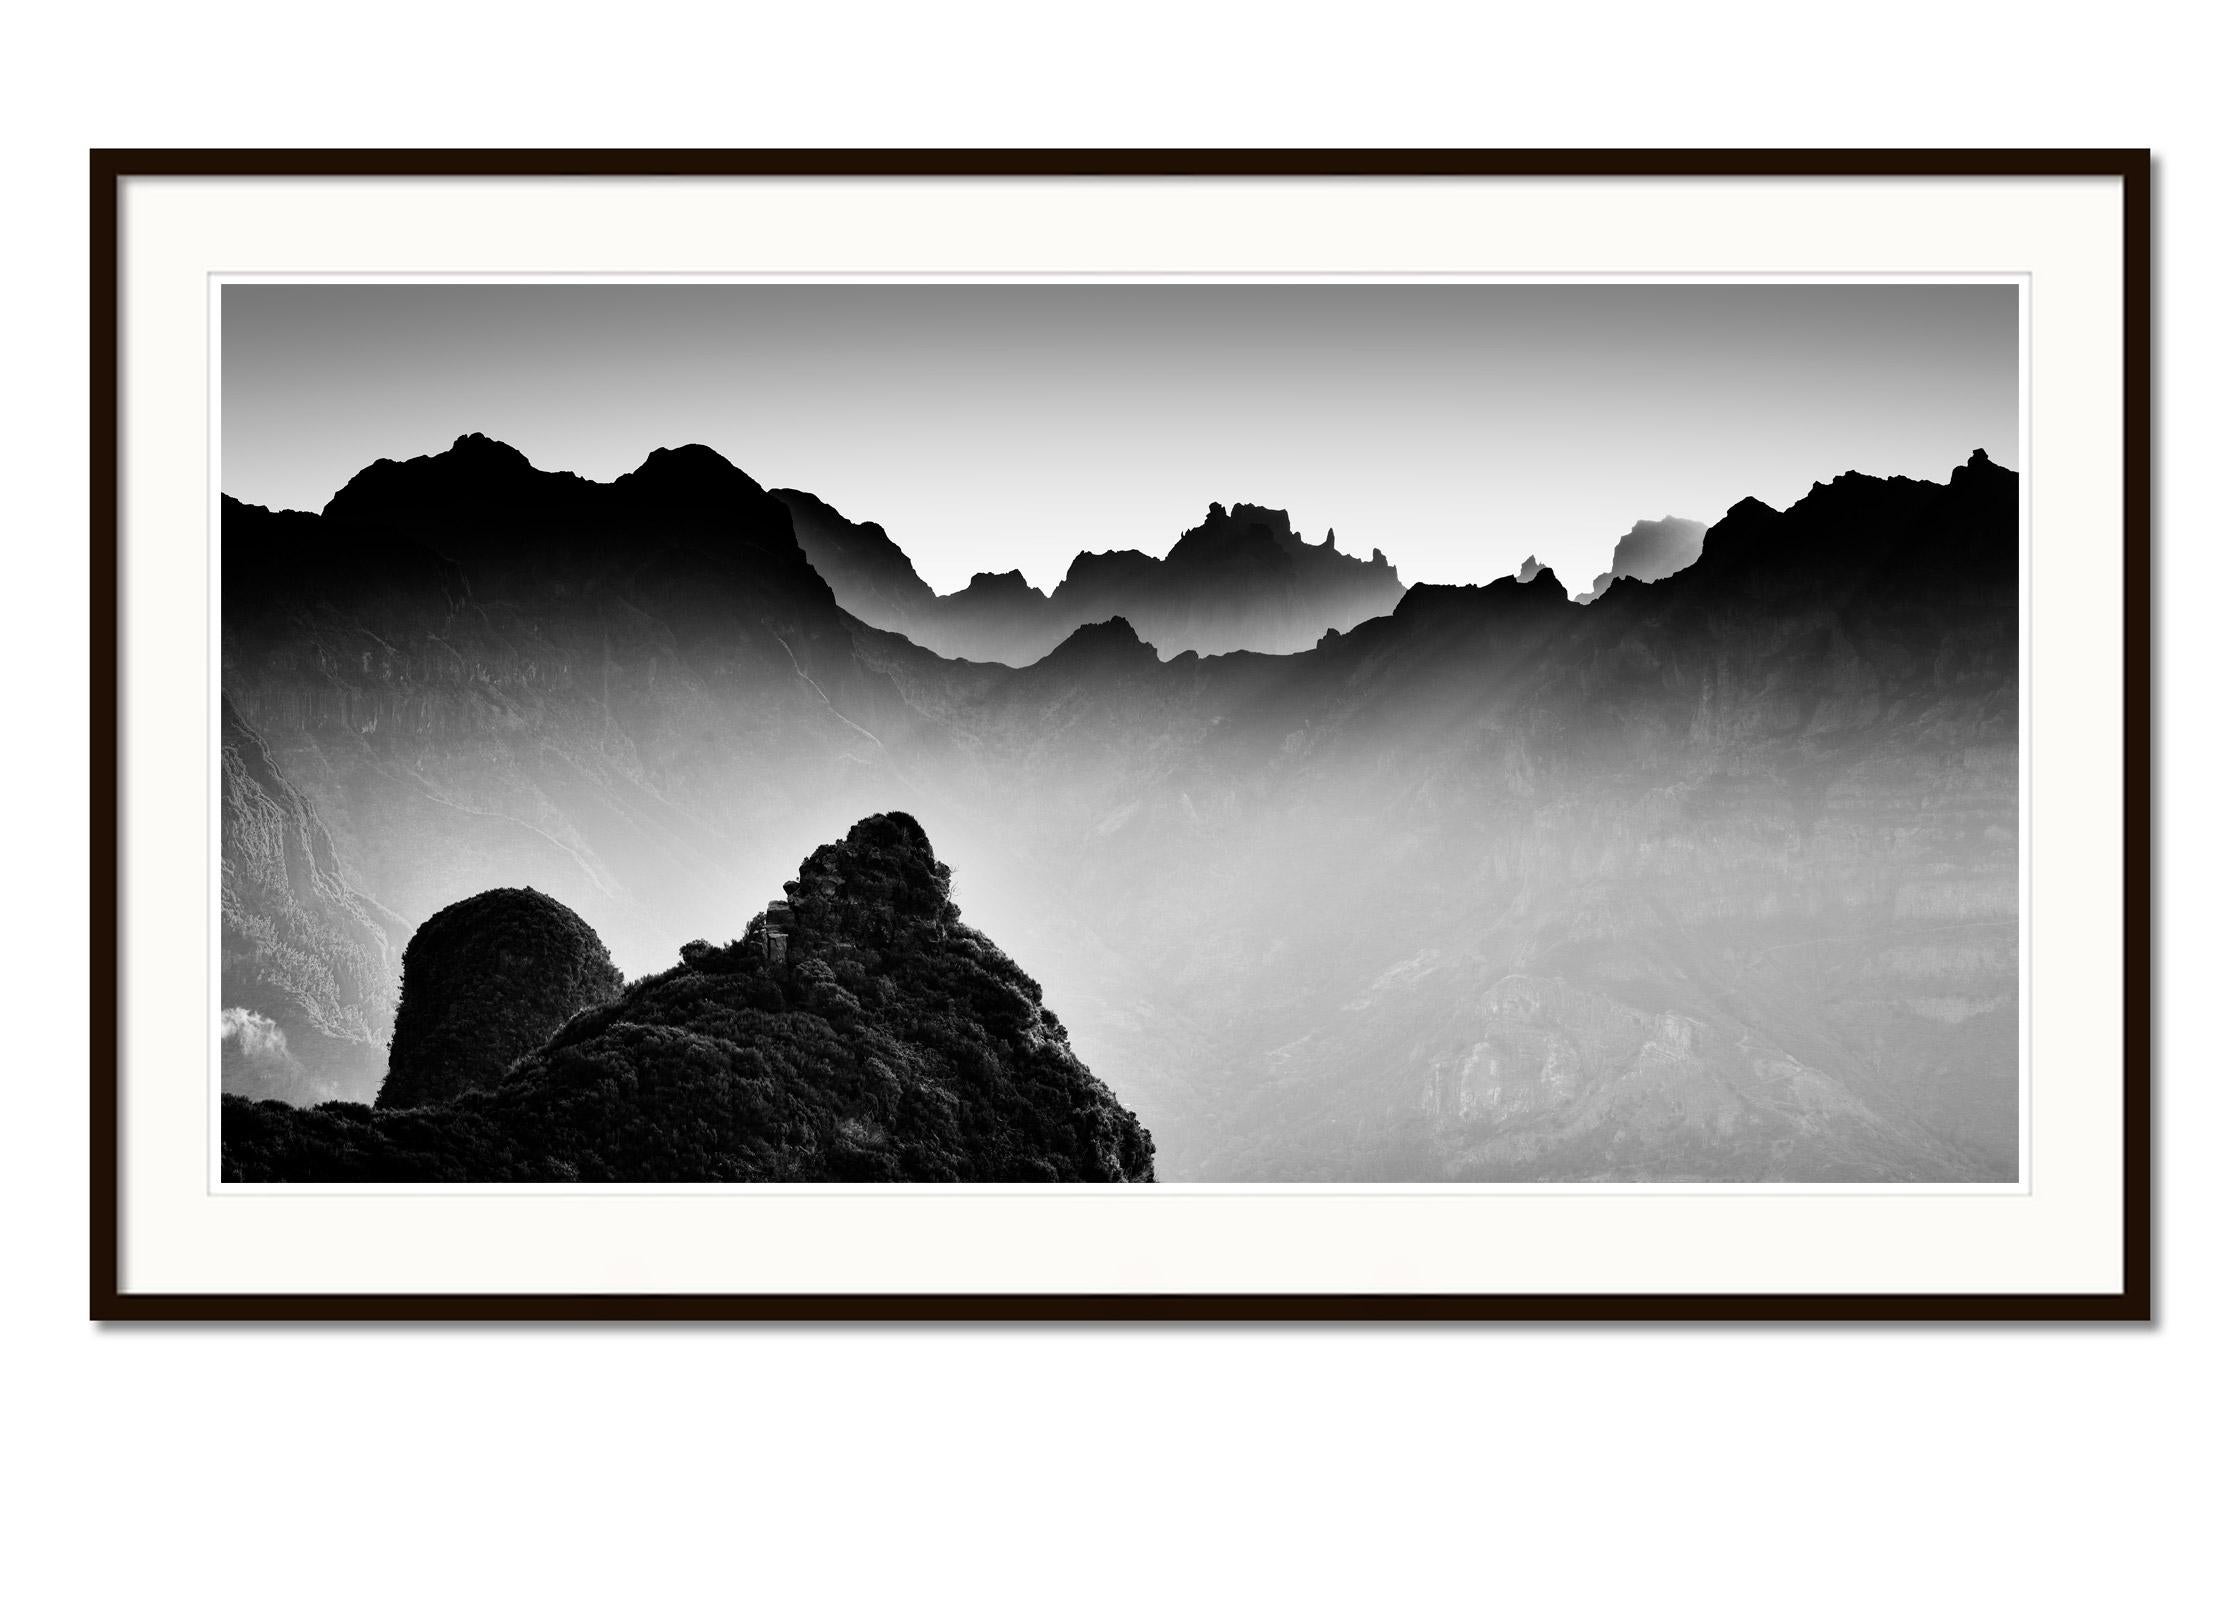 Morning Light in the Mountains, Madeira, black and white photography, landscape - Contemporary Photograph by Gerald Berghammer